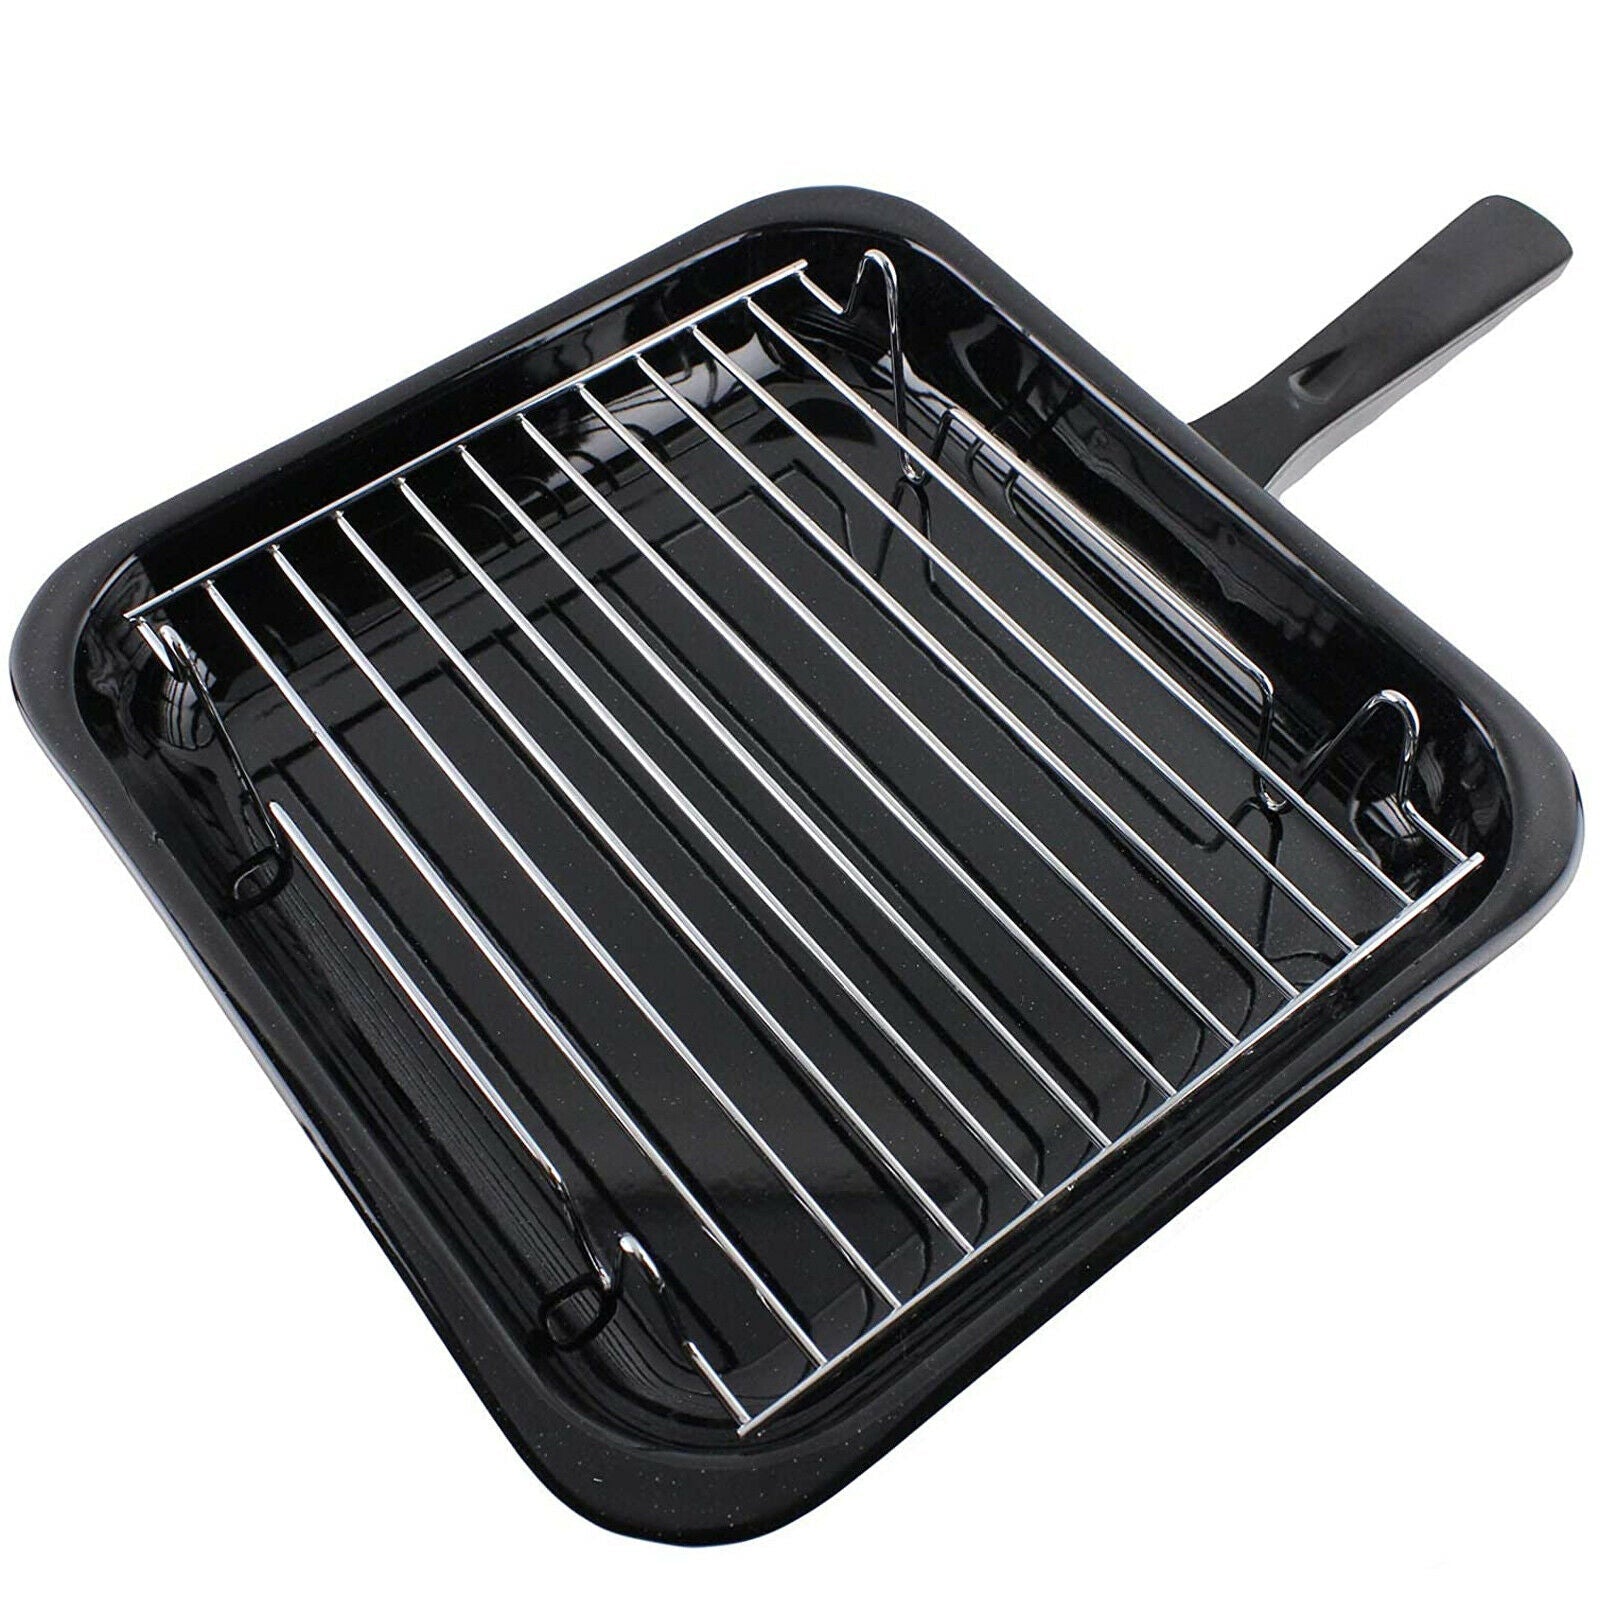 Universal small black non-stick grill pan with rack and detachable handle